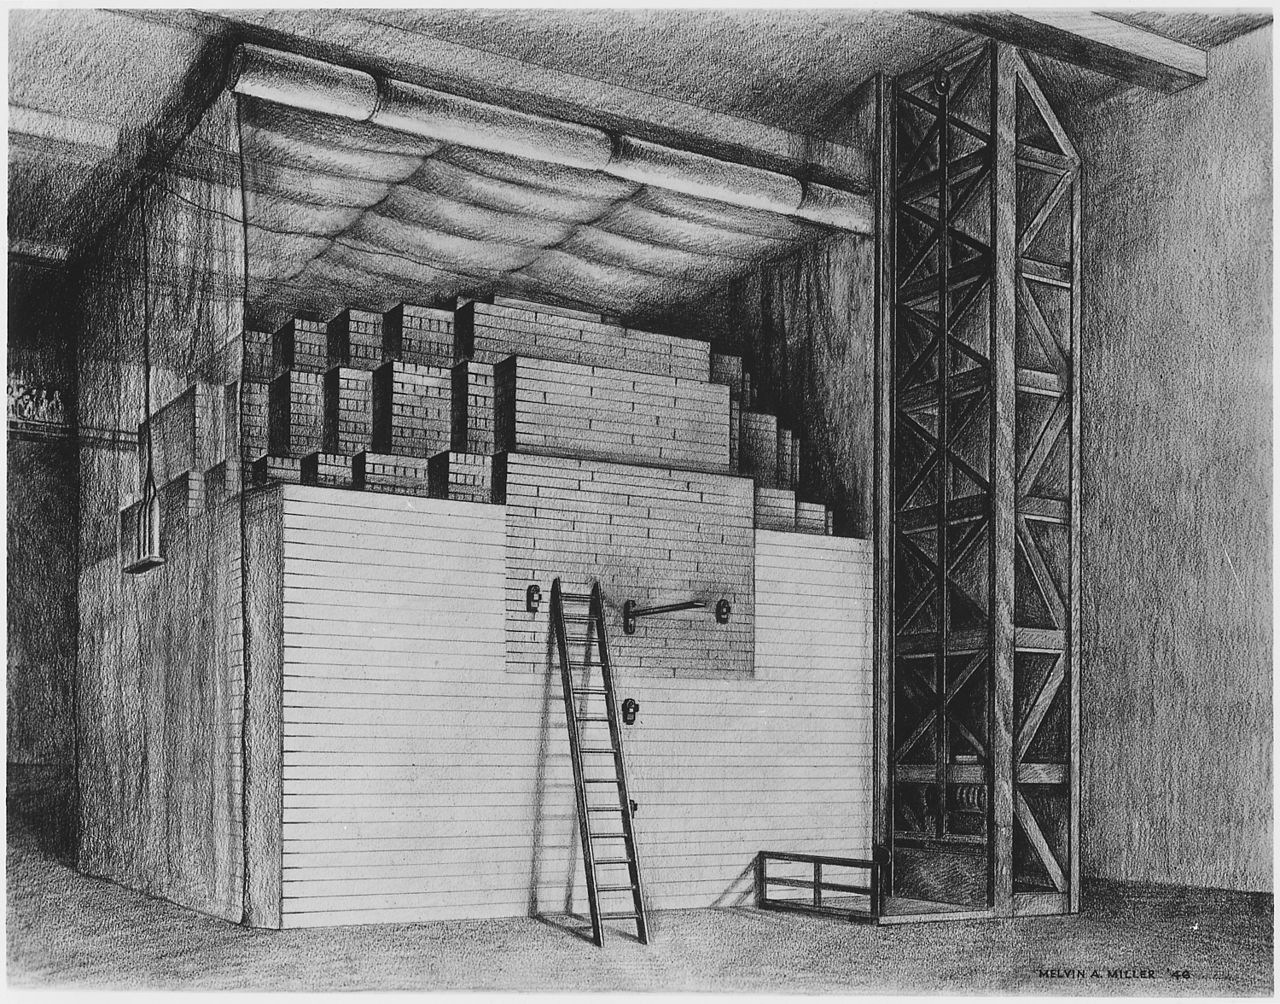 University of Chicago Stagg Field Pile-1 Reactor